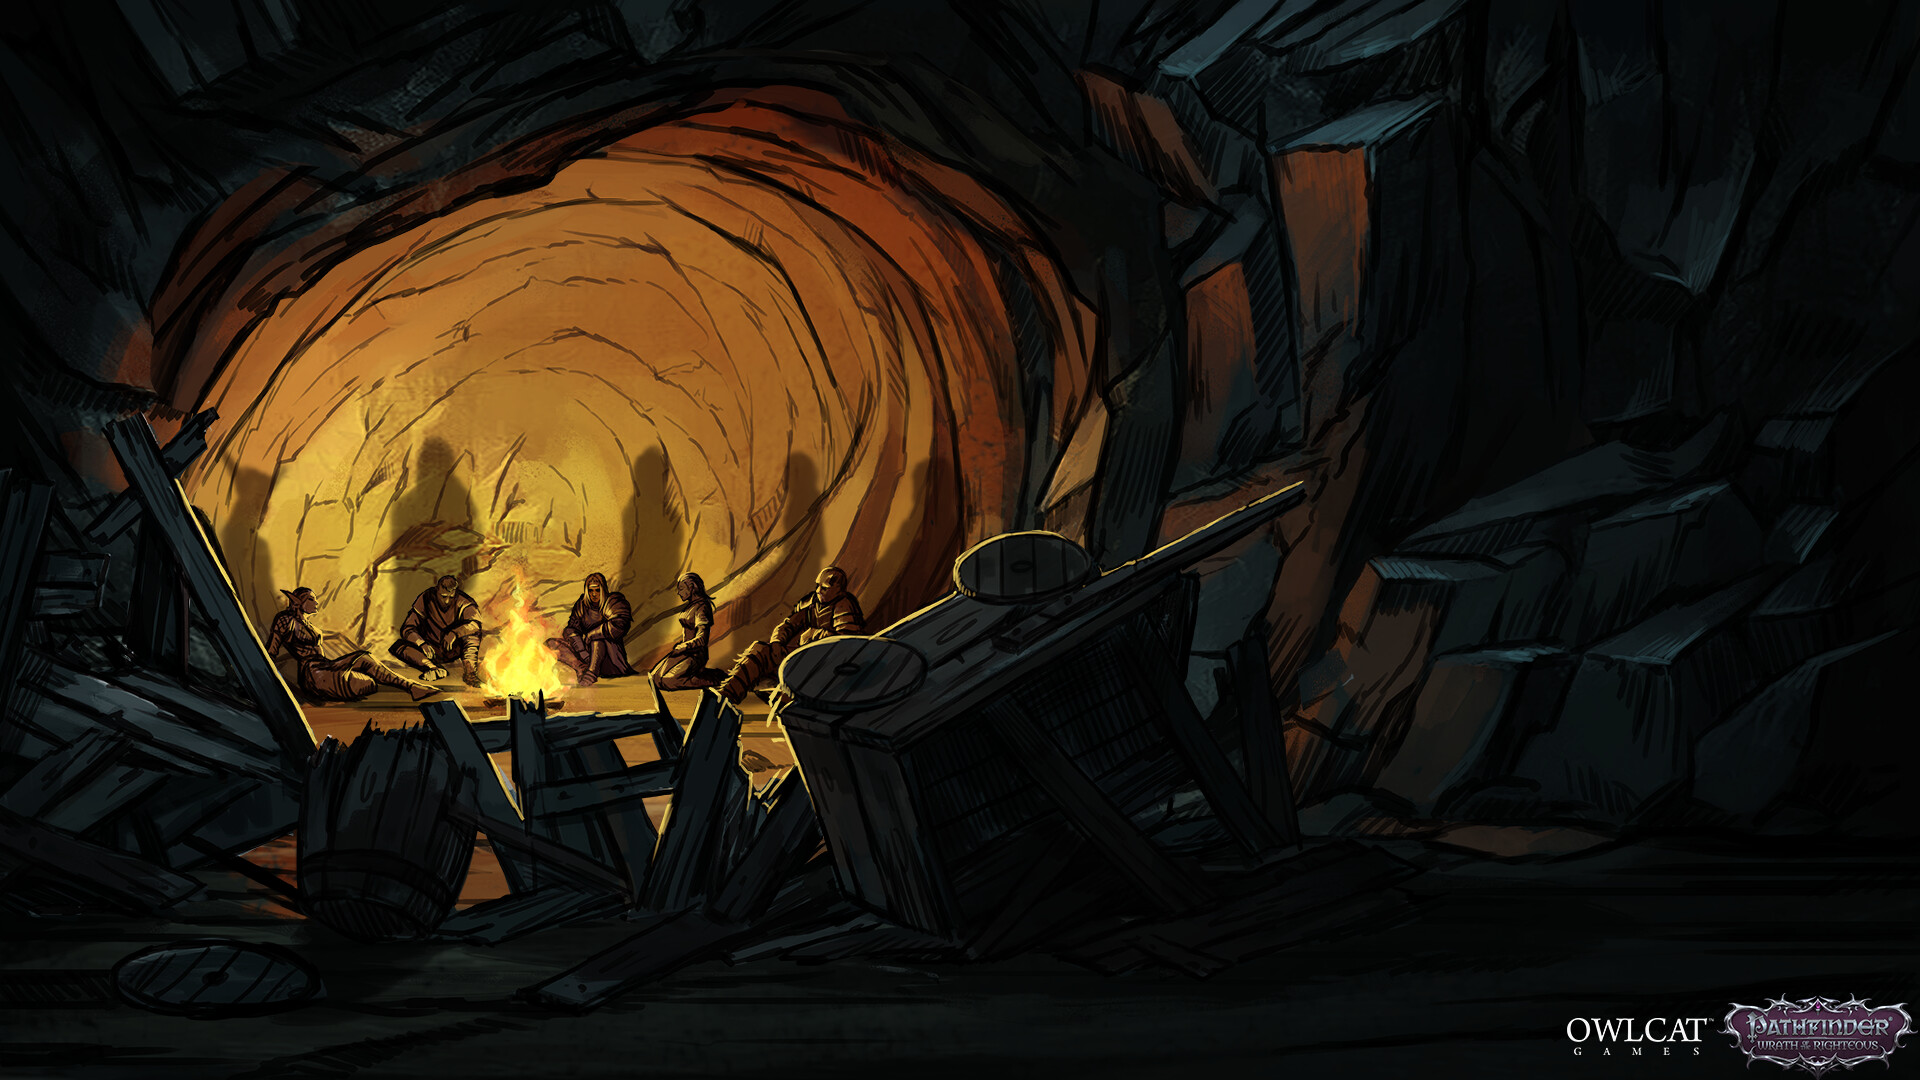 HD wallpaper featuring a scene from Pathfinder: Wrath of the Righteous with adventurers gathered around a campfire inside a cavernous tunnel.